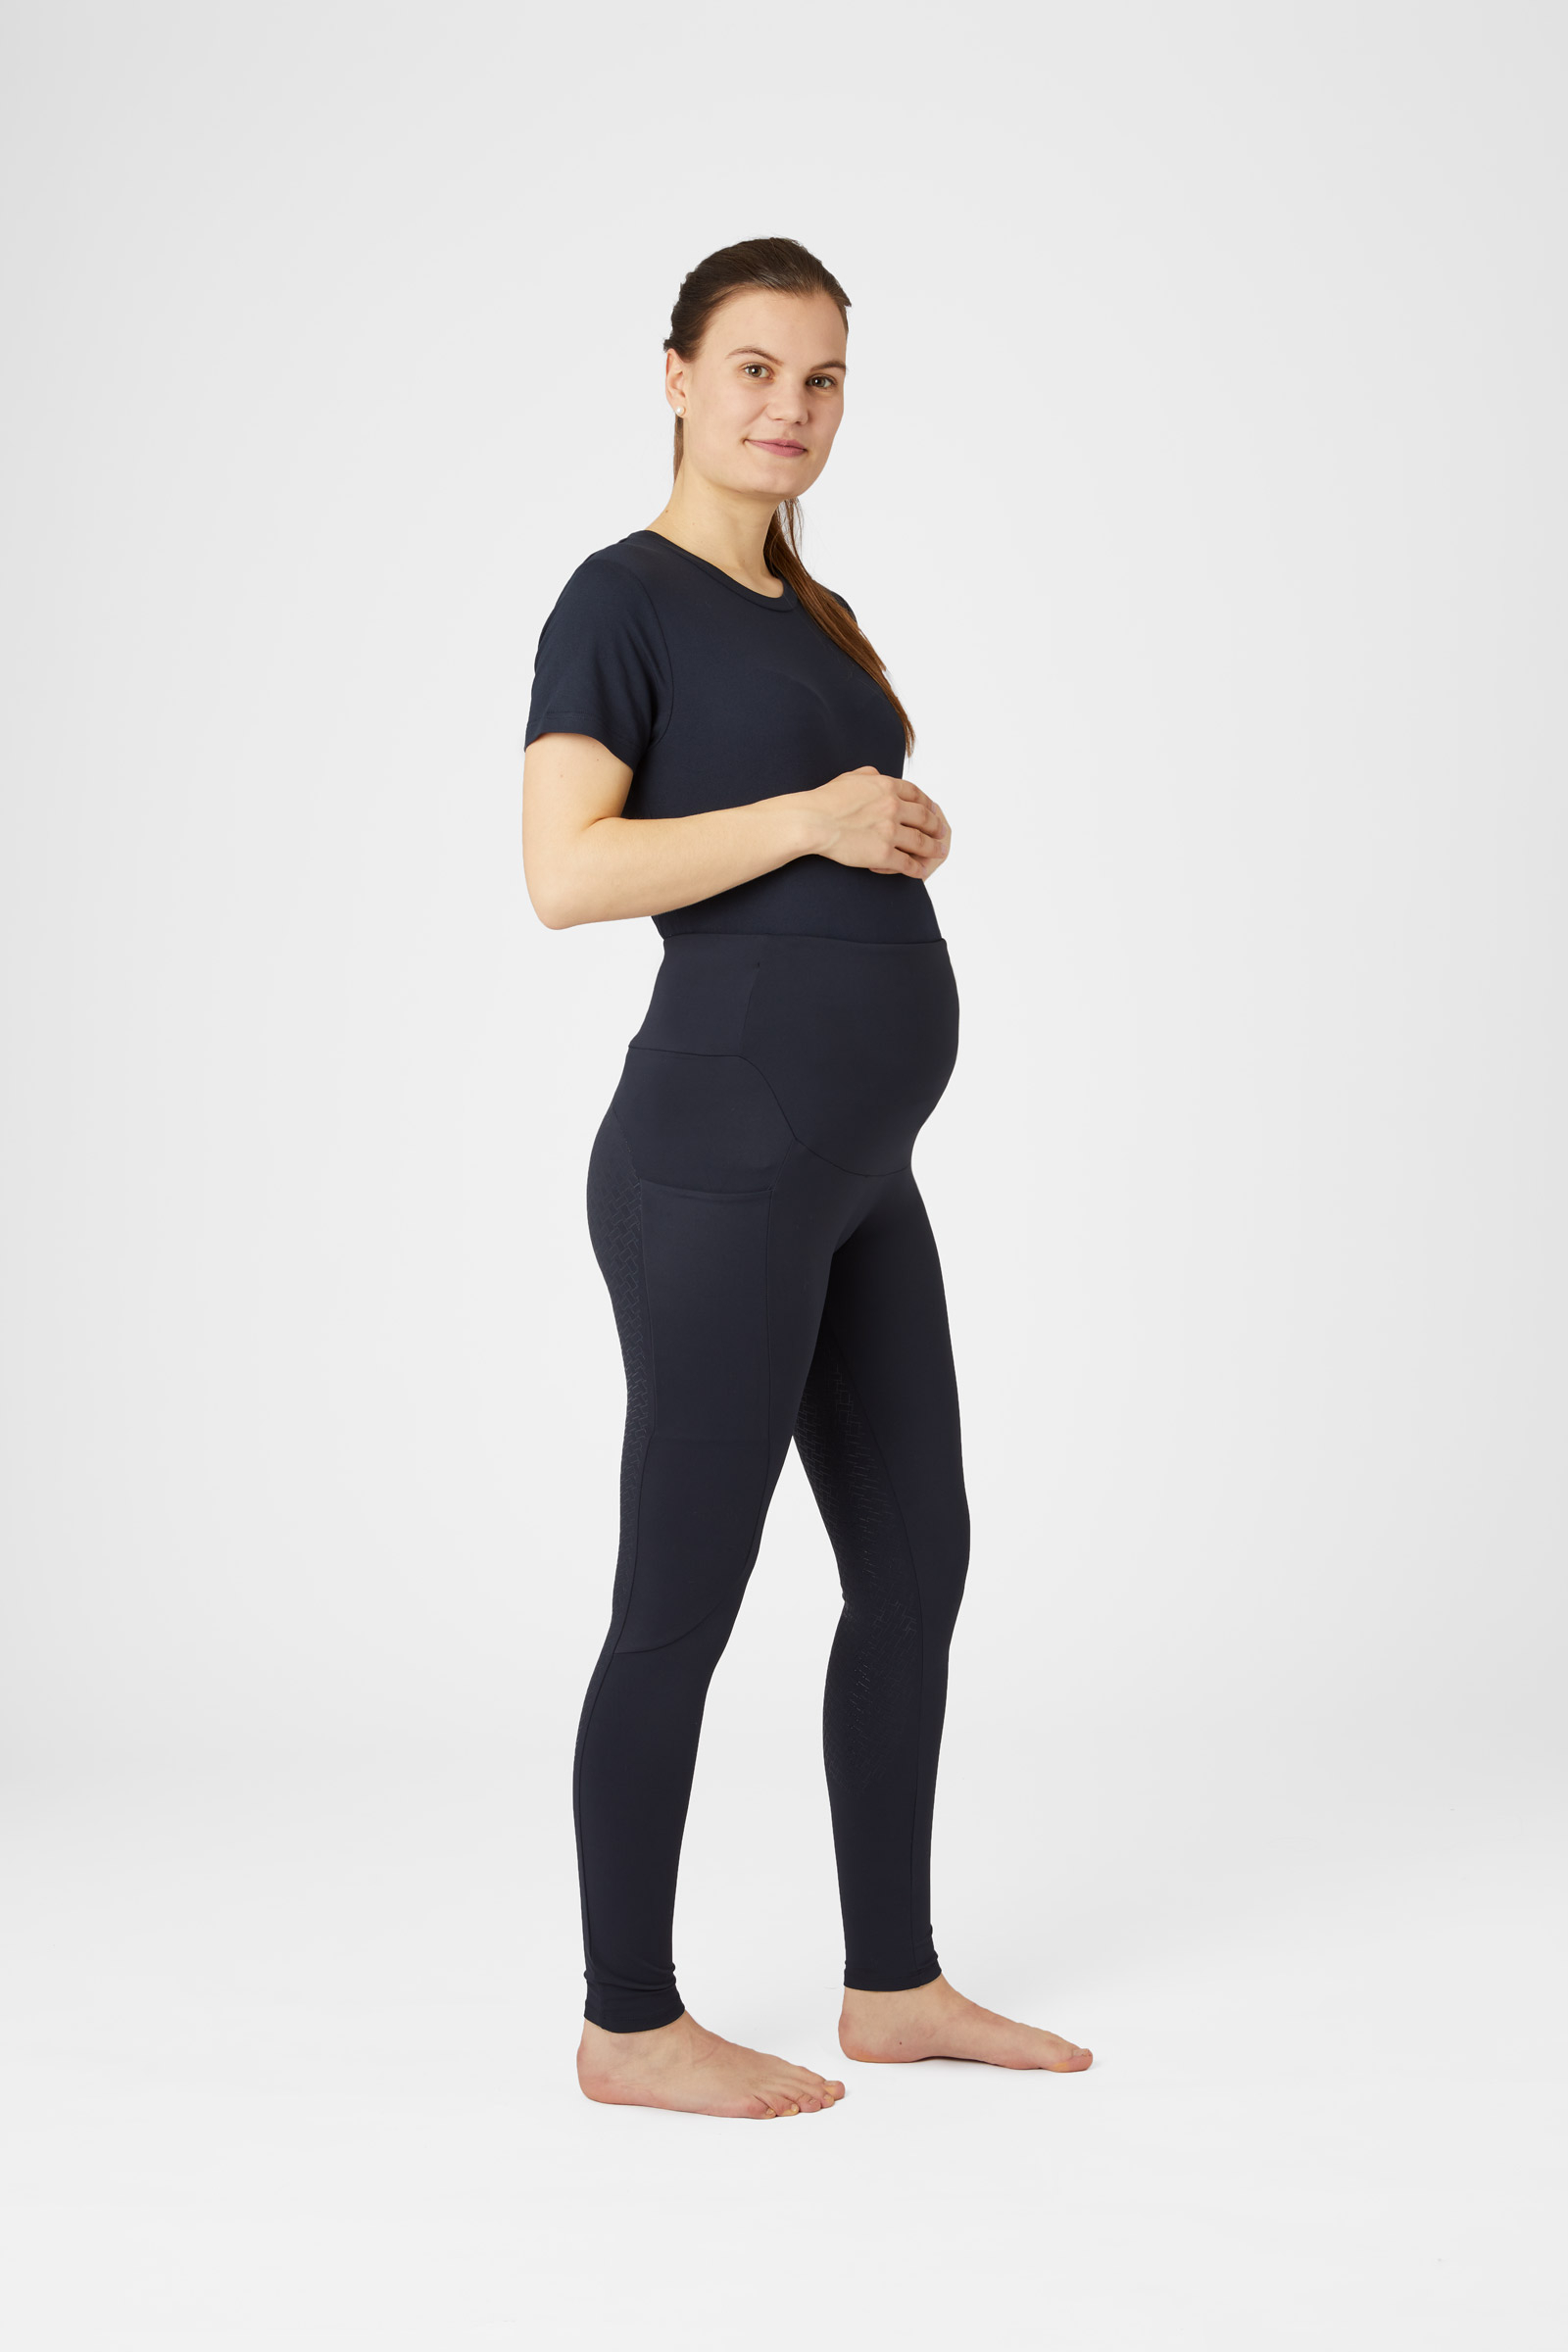 Horze Ginny Maternity Silicone Full Seat Riding Tights with Phone Pockets